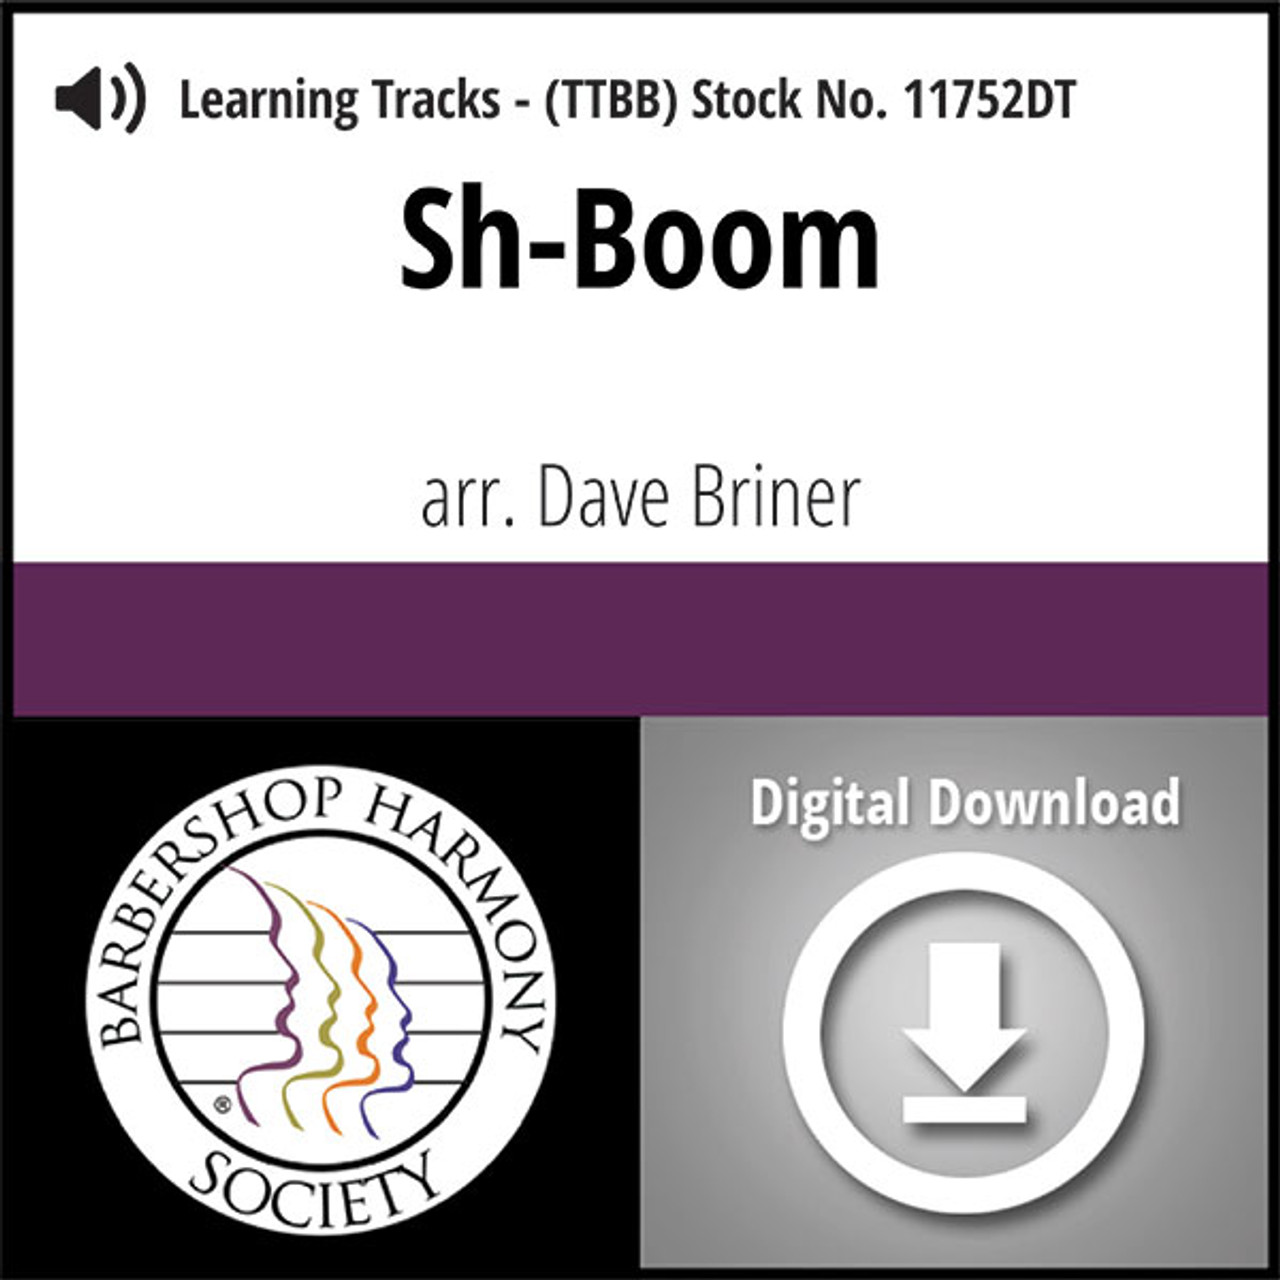 Sh-Boom (Life Could Be a Dream) (TTBB) (arr. Briner) - Digital Learning Tracks for 8641